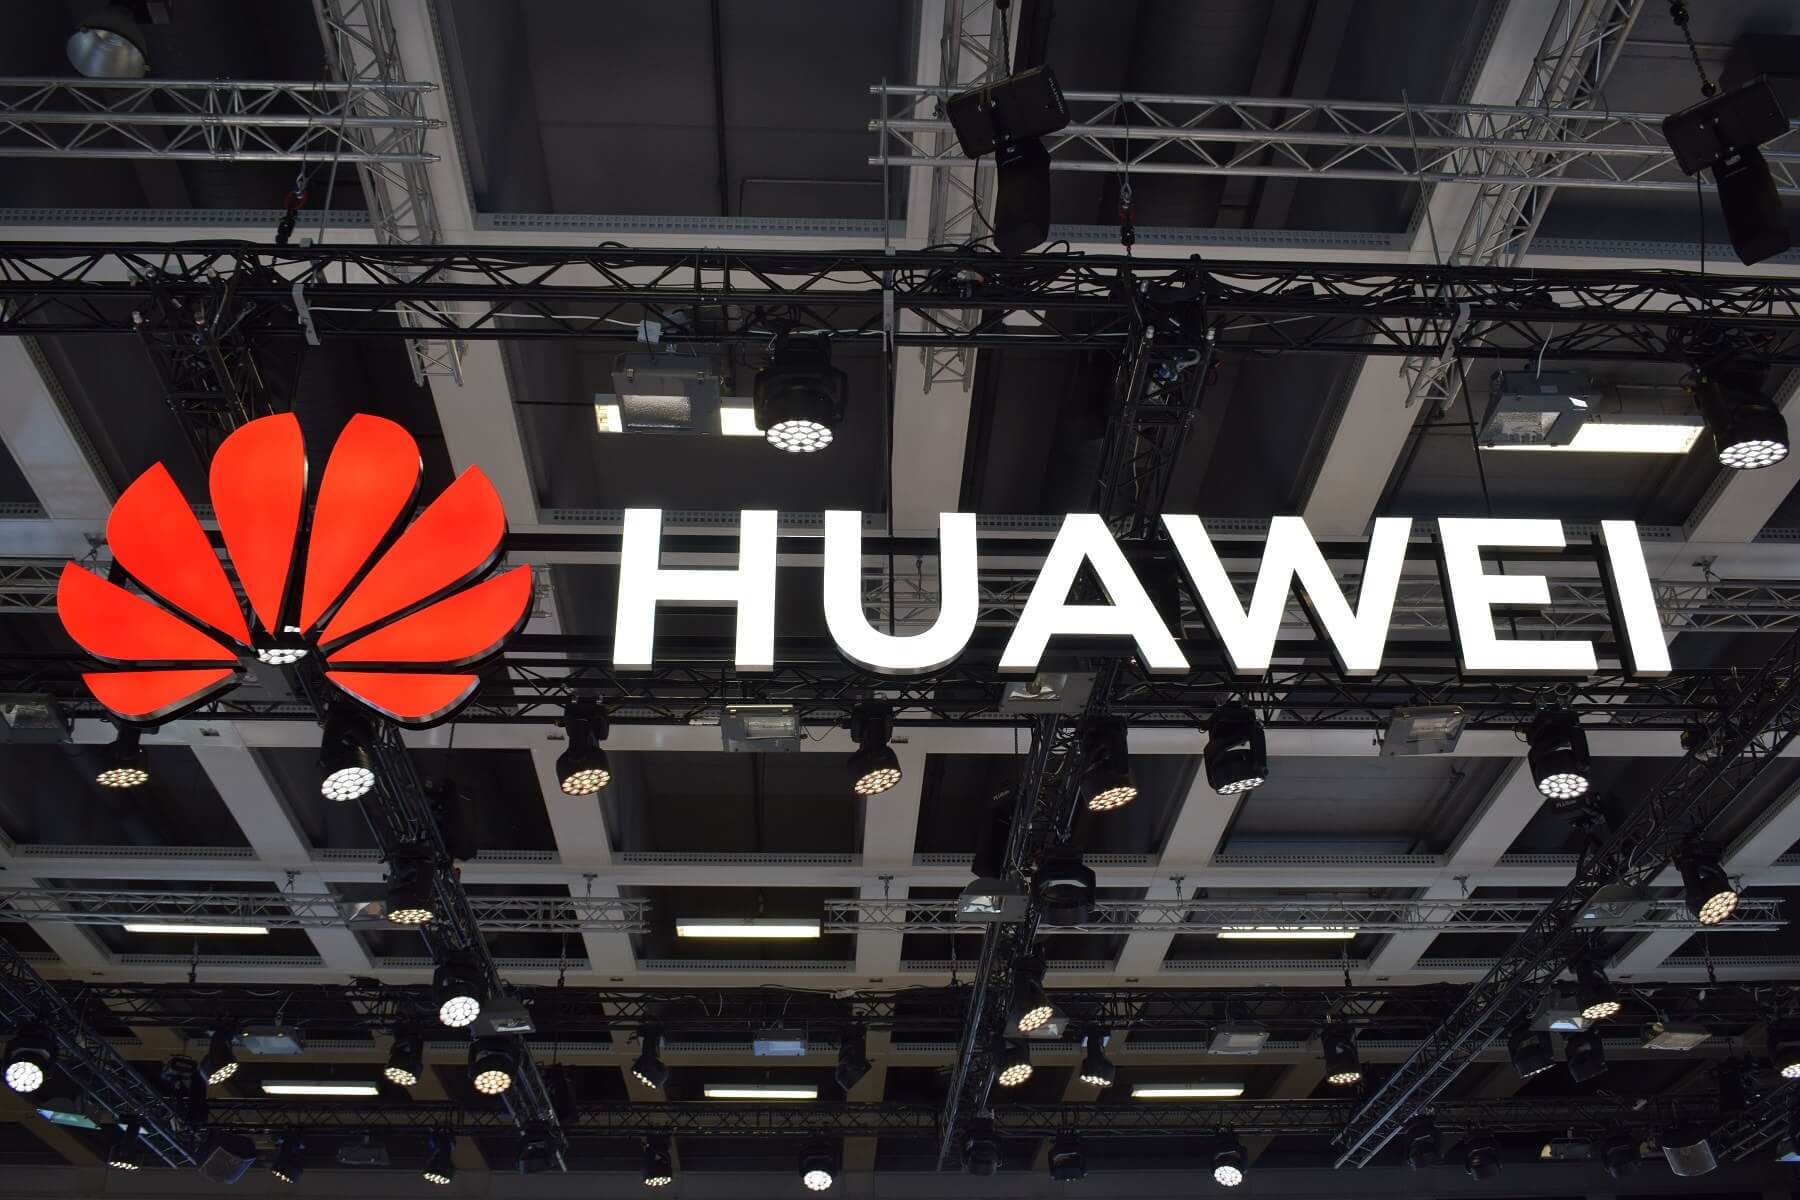 Huawei founder says spying allegations are untrue, calls Donald Trump a great president